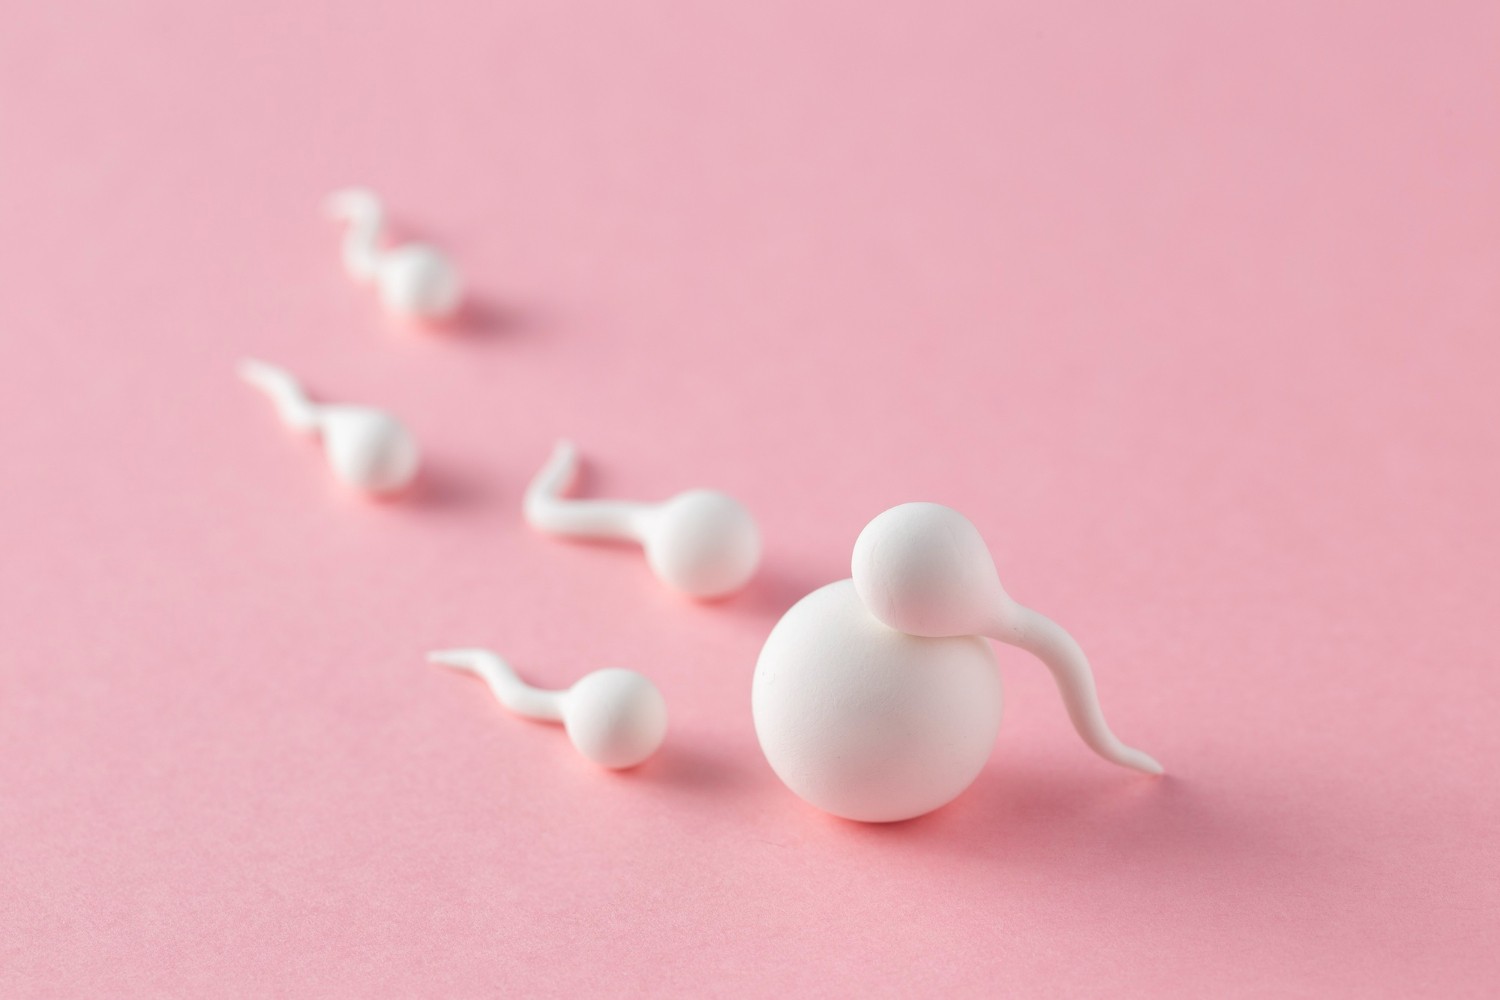 Swallowing Sperm Can You Get Pregnant? Check the following facts!